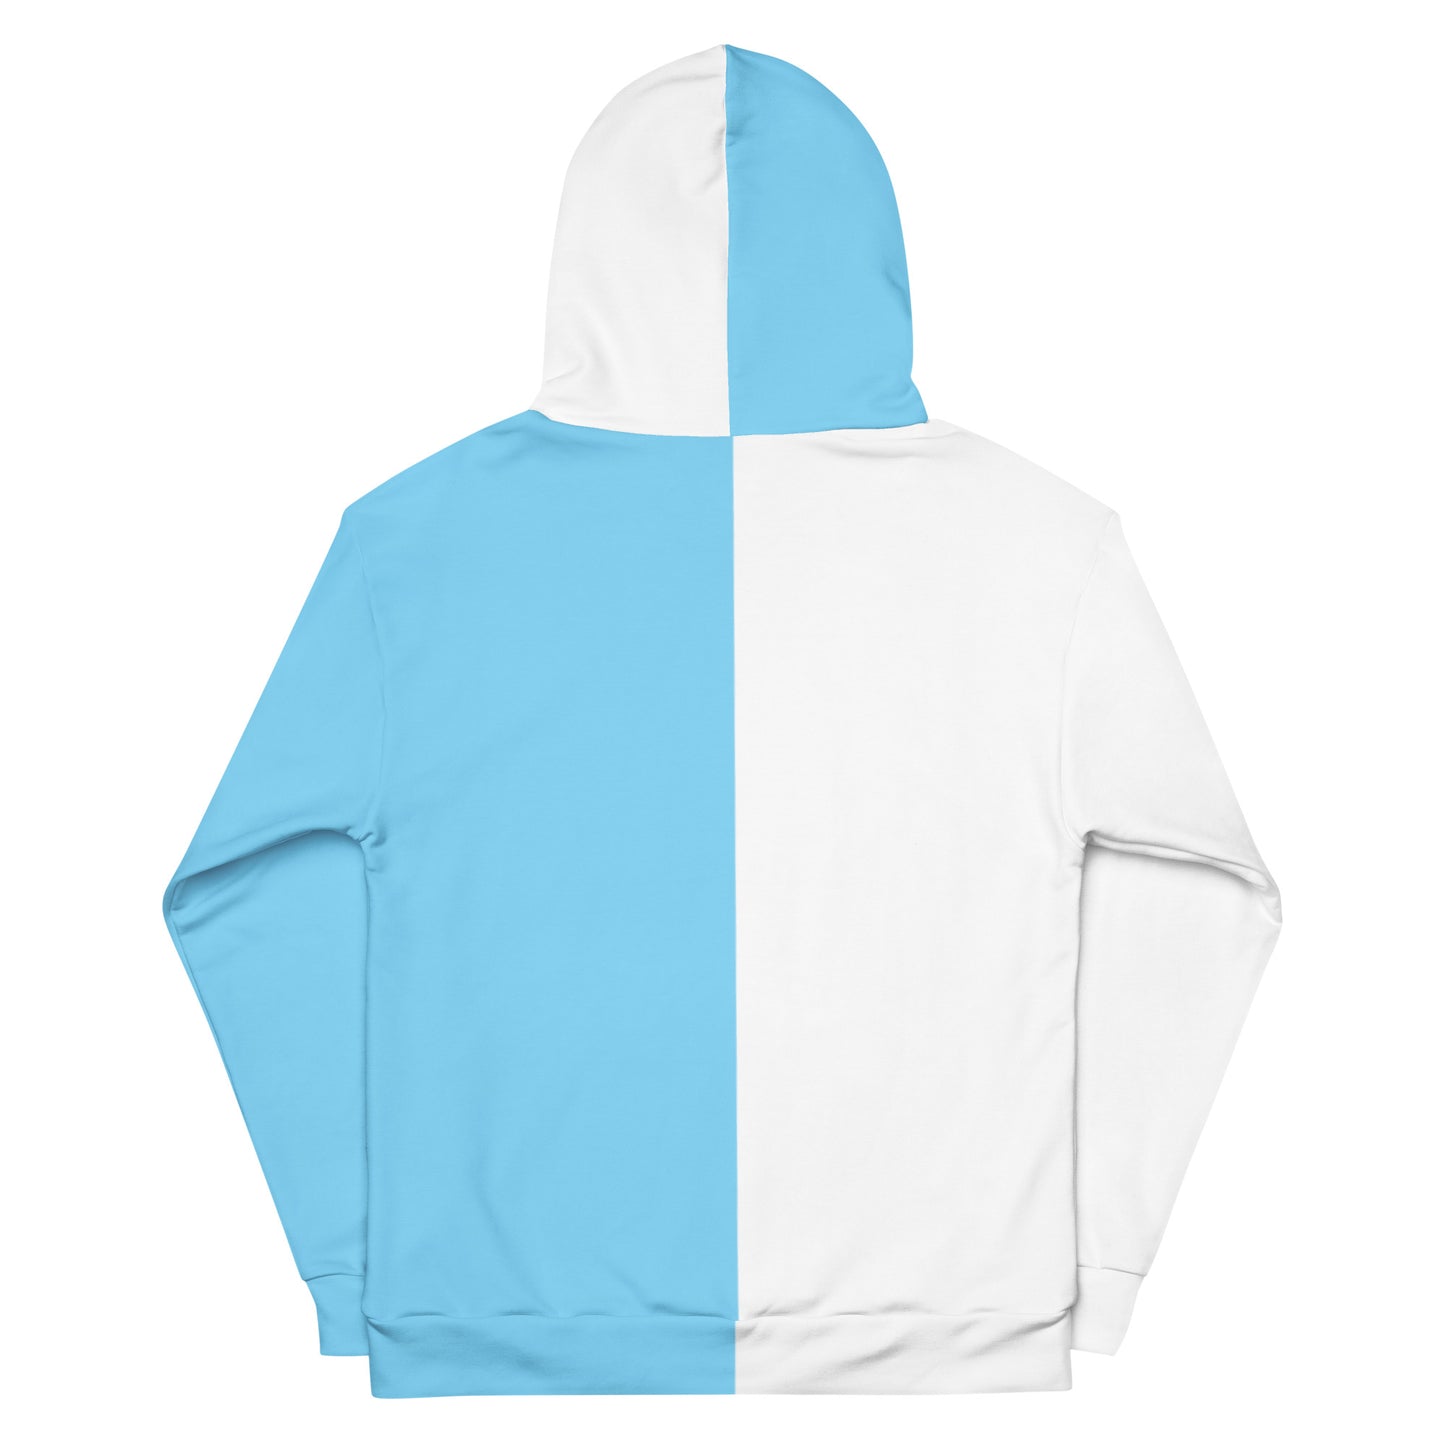 Elementary Threads (White/Blue) Two Tone Hoodie